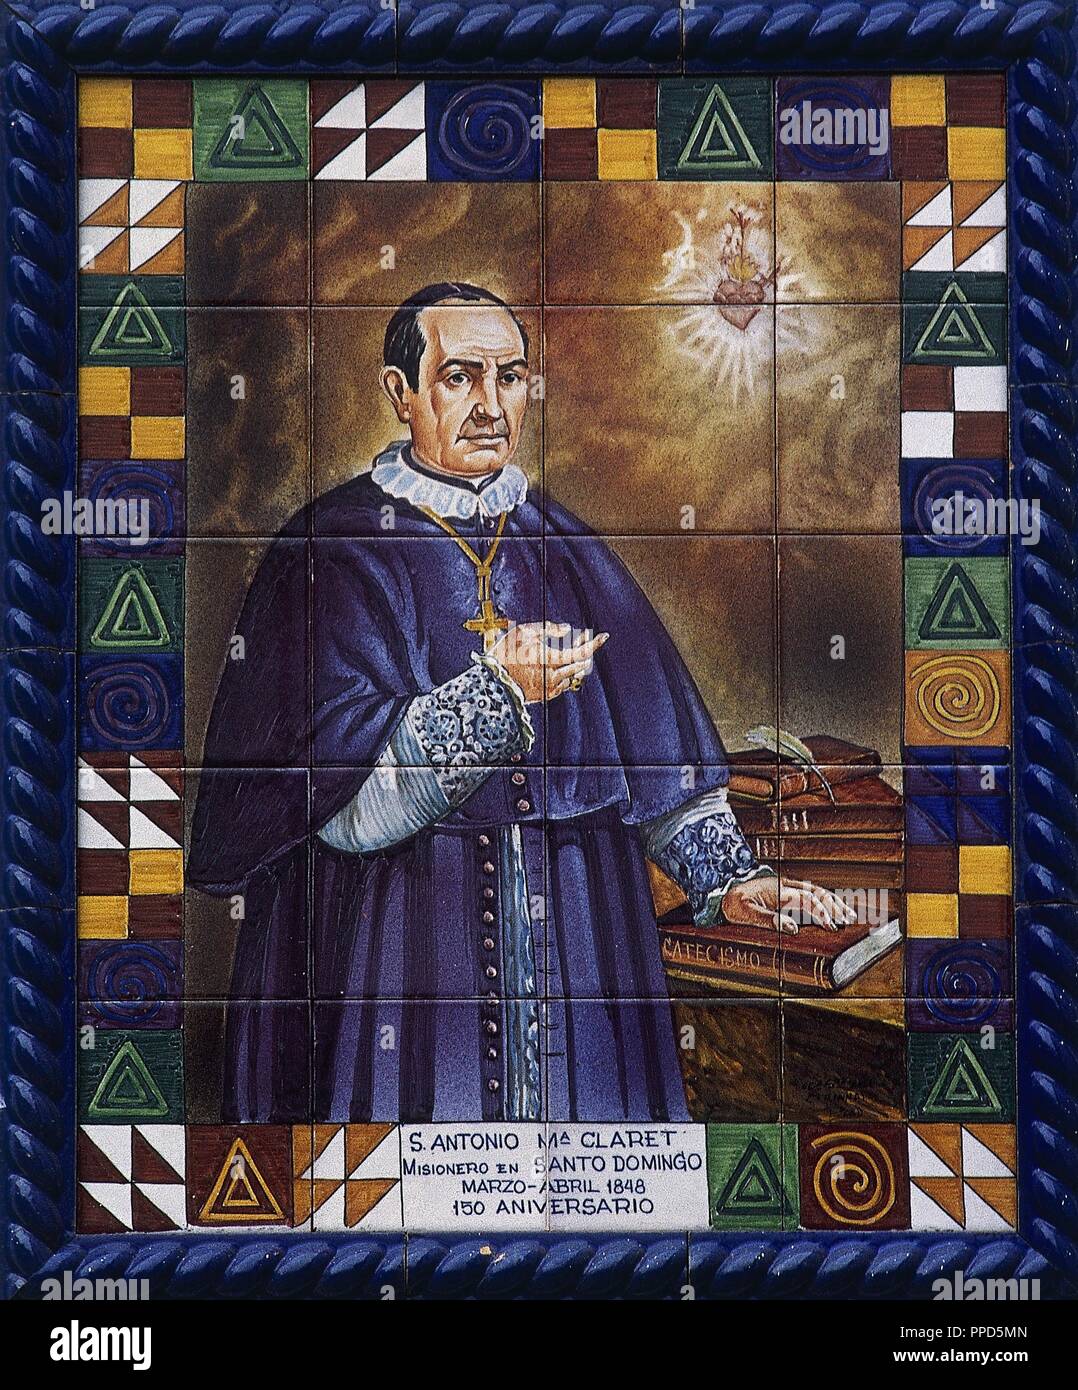 Saint Anthony Mary Claret (Sallent, 1807-Cistercian abbey at Fontfroide, Narbonne, 1870). Spanish Roman Catholic  archbishop and missionary.  He was confessor of Isabella II of Spain. Founder of the congregation called the Claretians. Ceramic panel on the facade of the Church of Santo Domingo de Guzman. Las Palmas de Gran Canaria, Canary Islands, Spain. Stock Photo